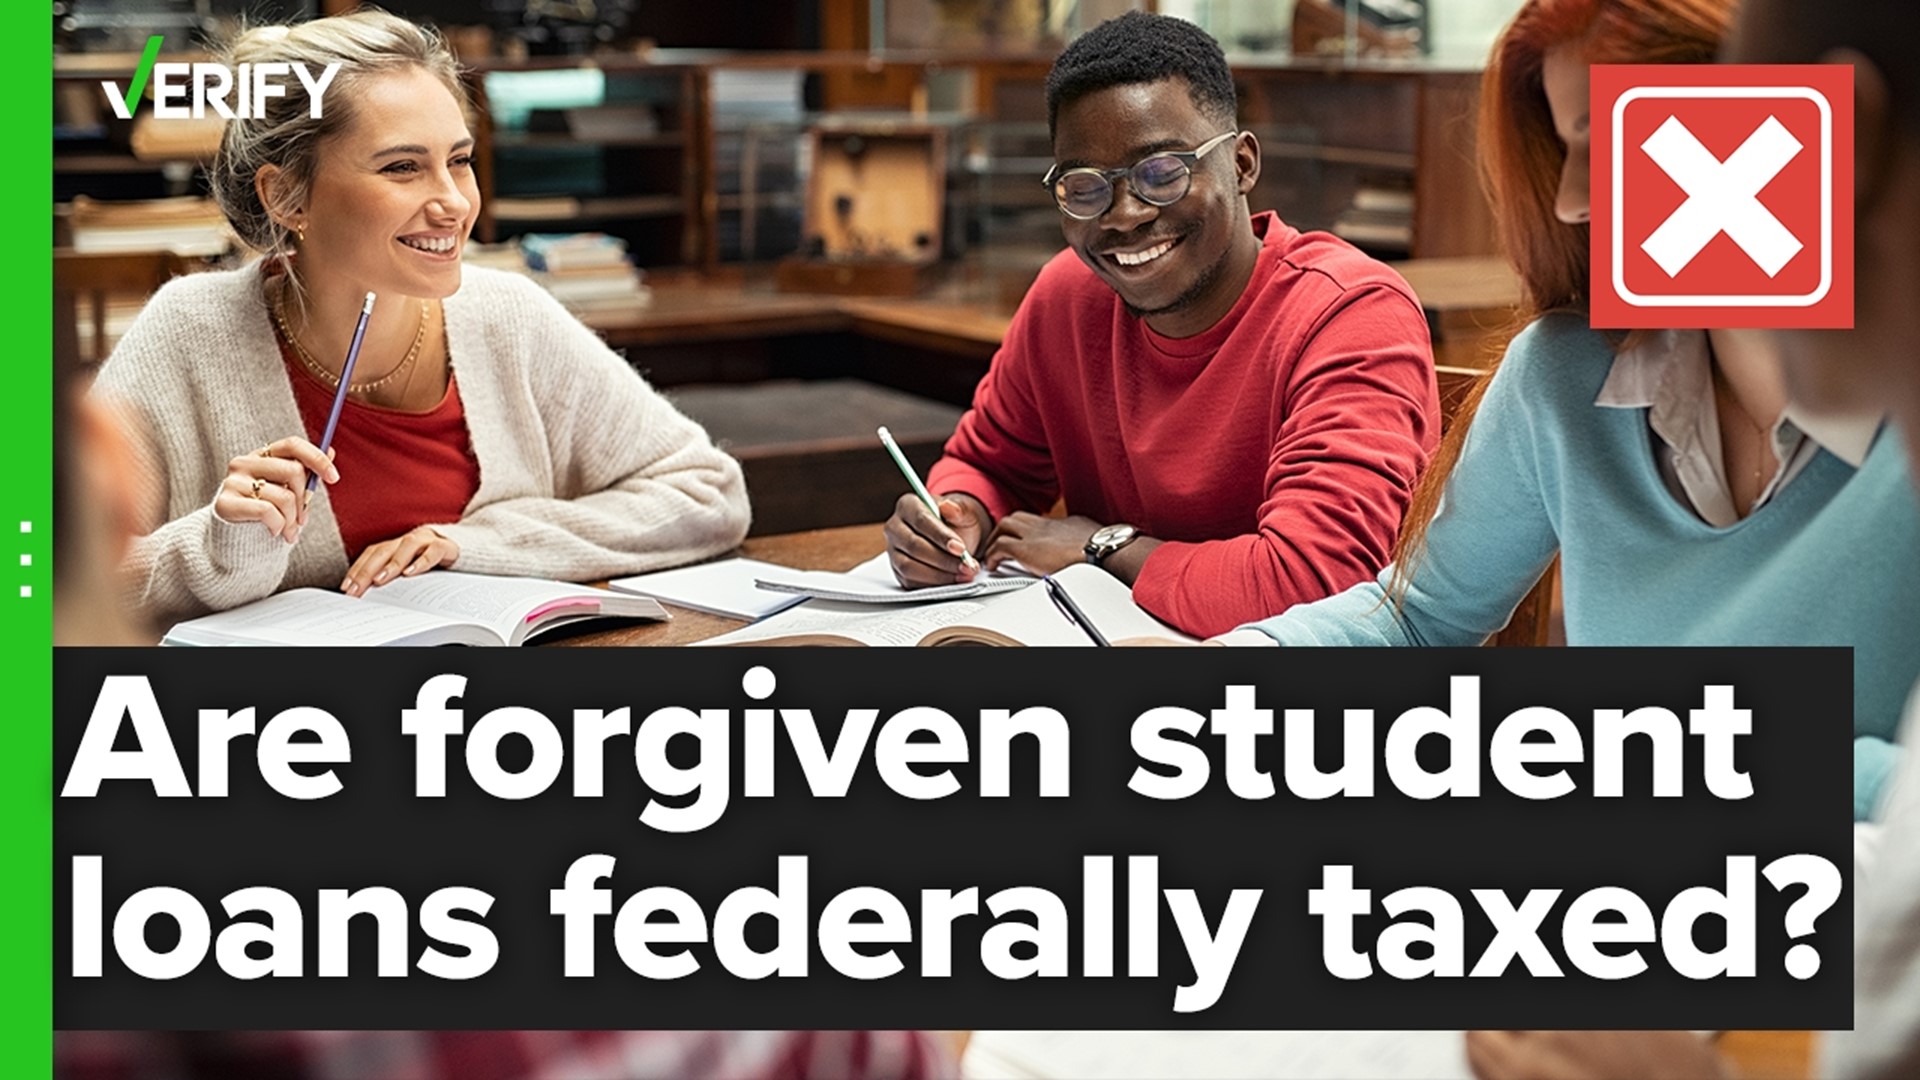 Federal tax-free student loan forgiveness through at least 2025 was promised as part of the American Rescue Plan of 2021. States decide if they want to tax instead.